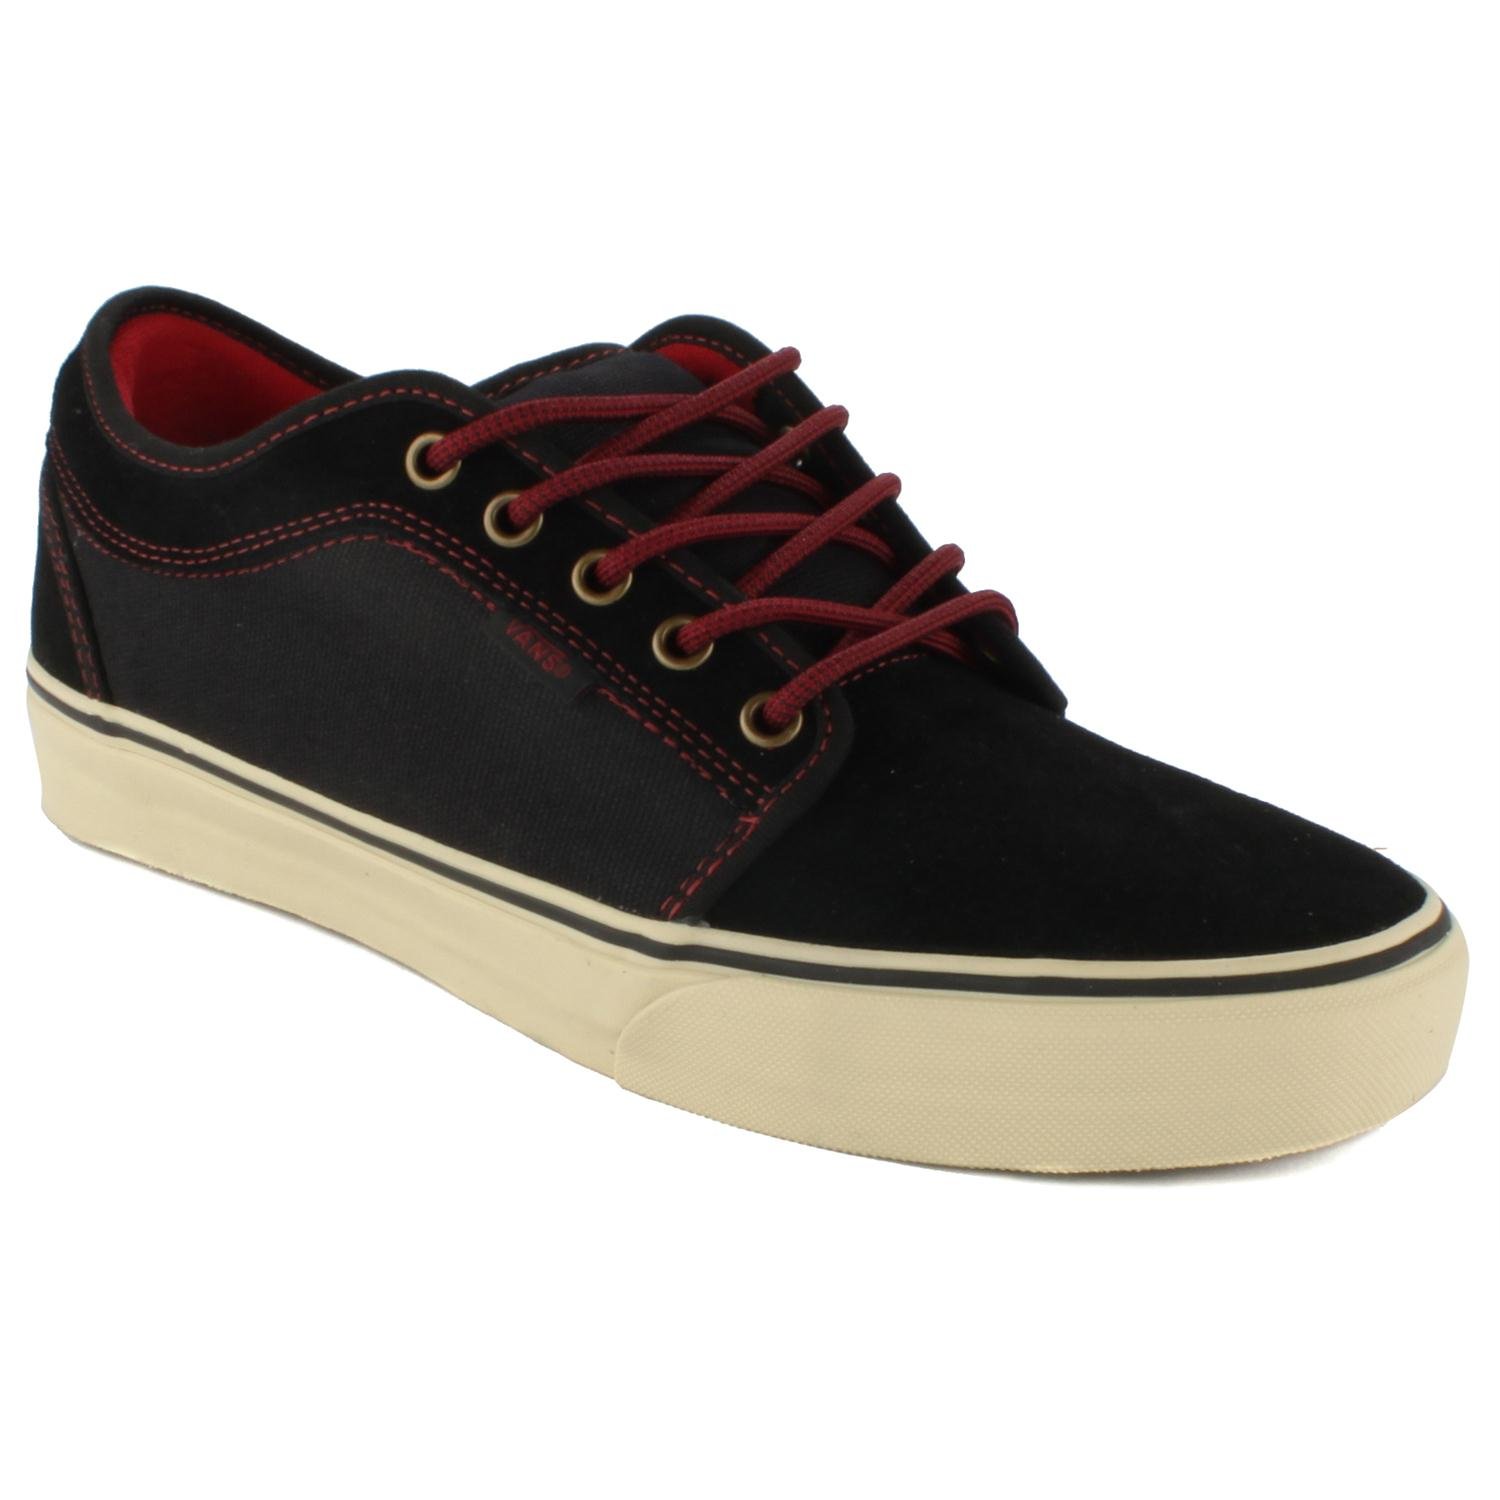 Vans Chukka Low Shoes | evo outlet